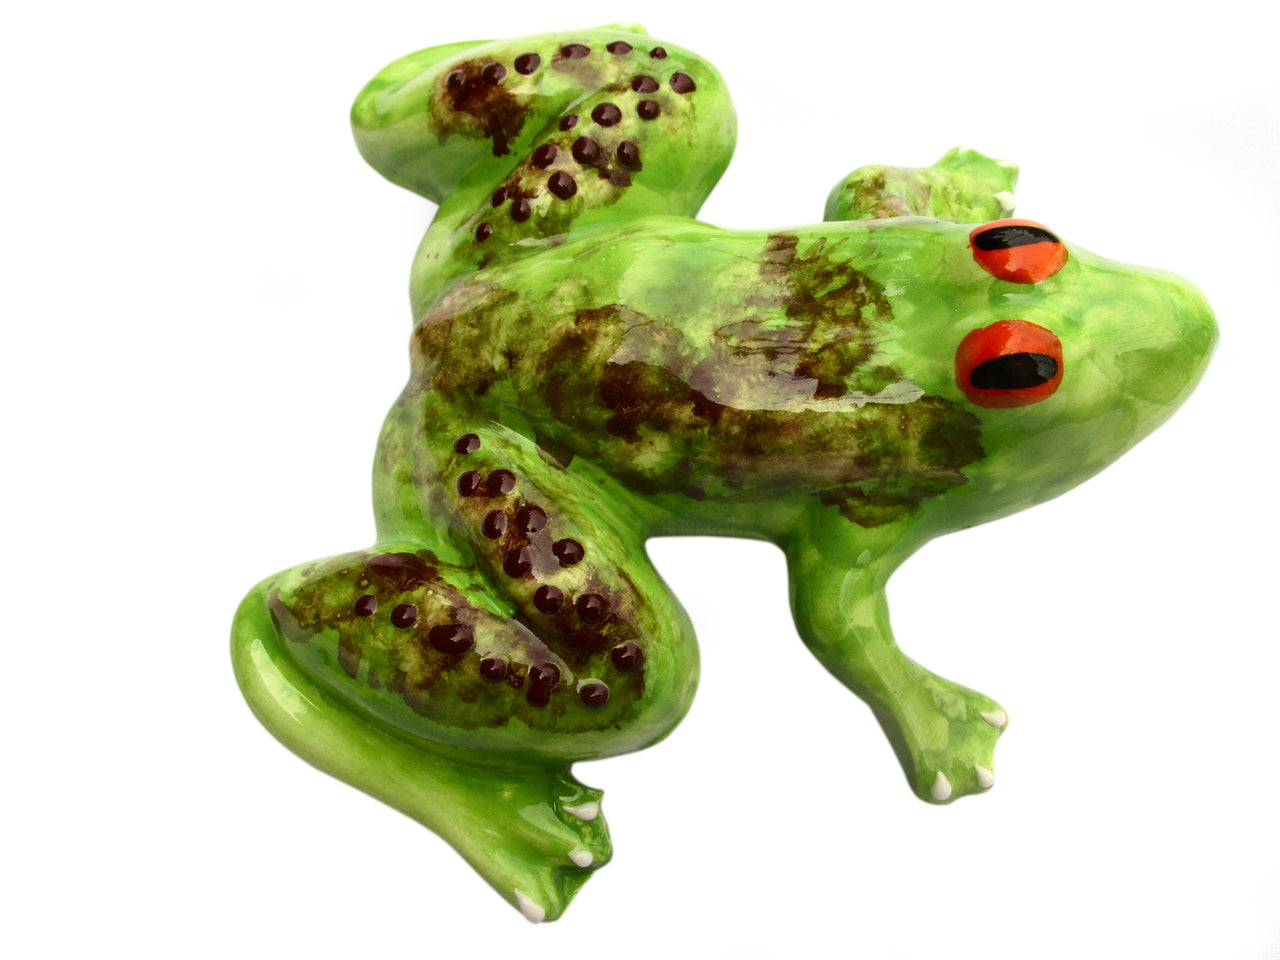 Miss Pond Frog - Ceramic Frog Hand Painted In Spain